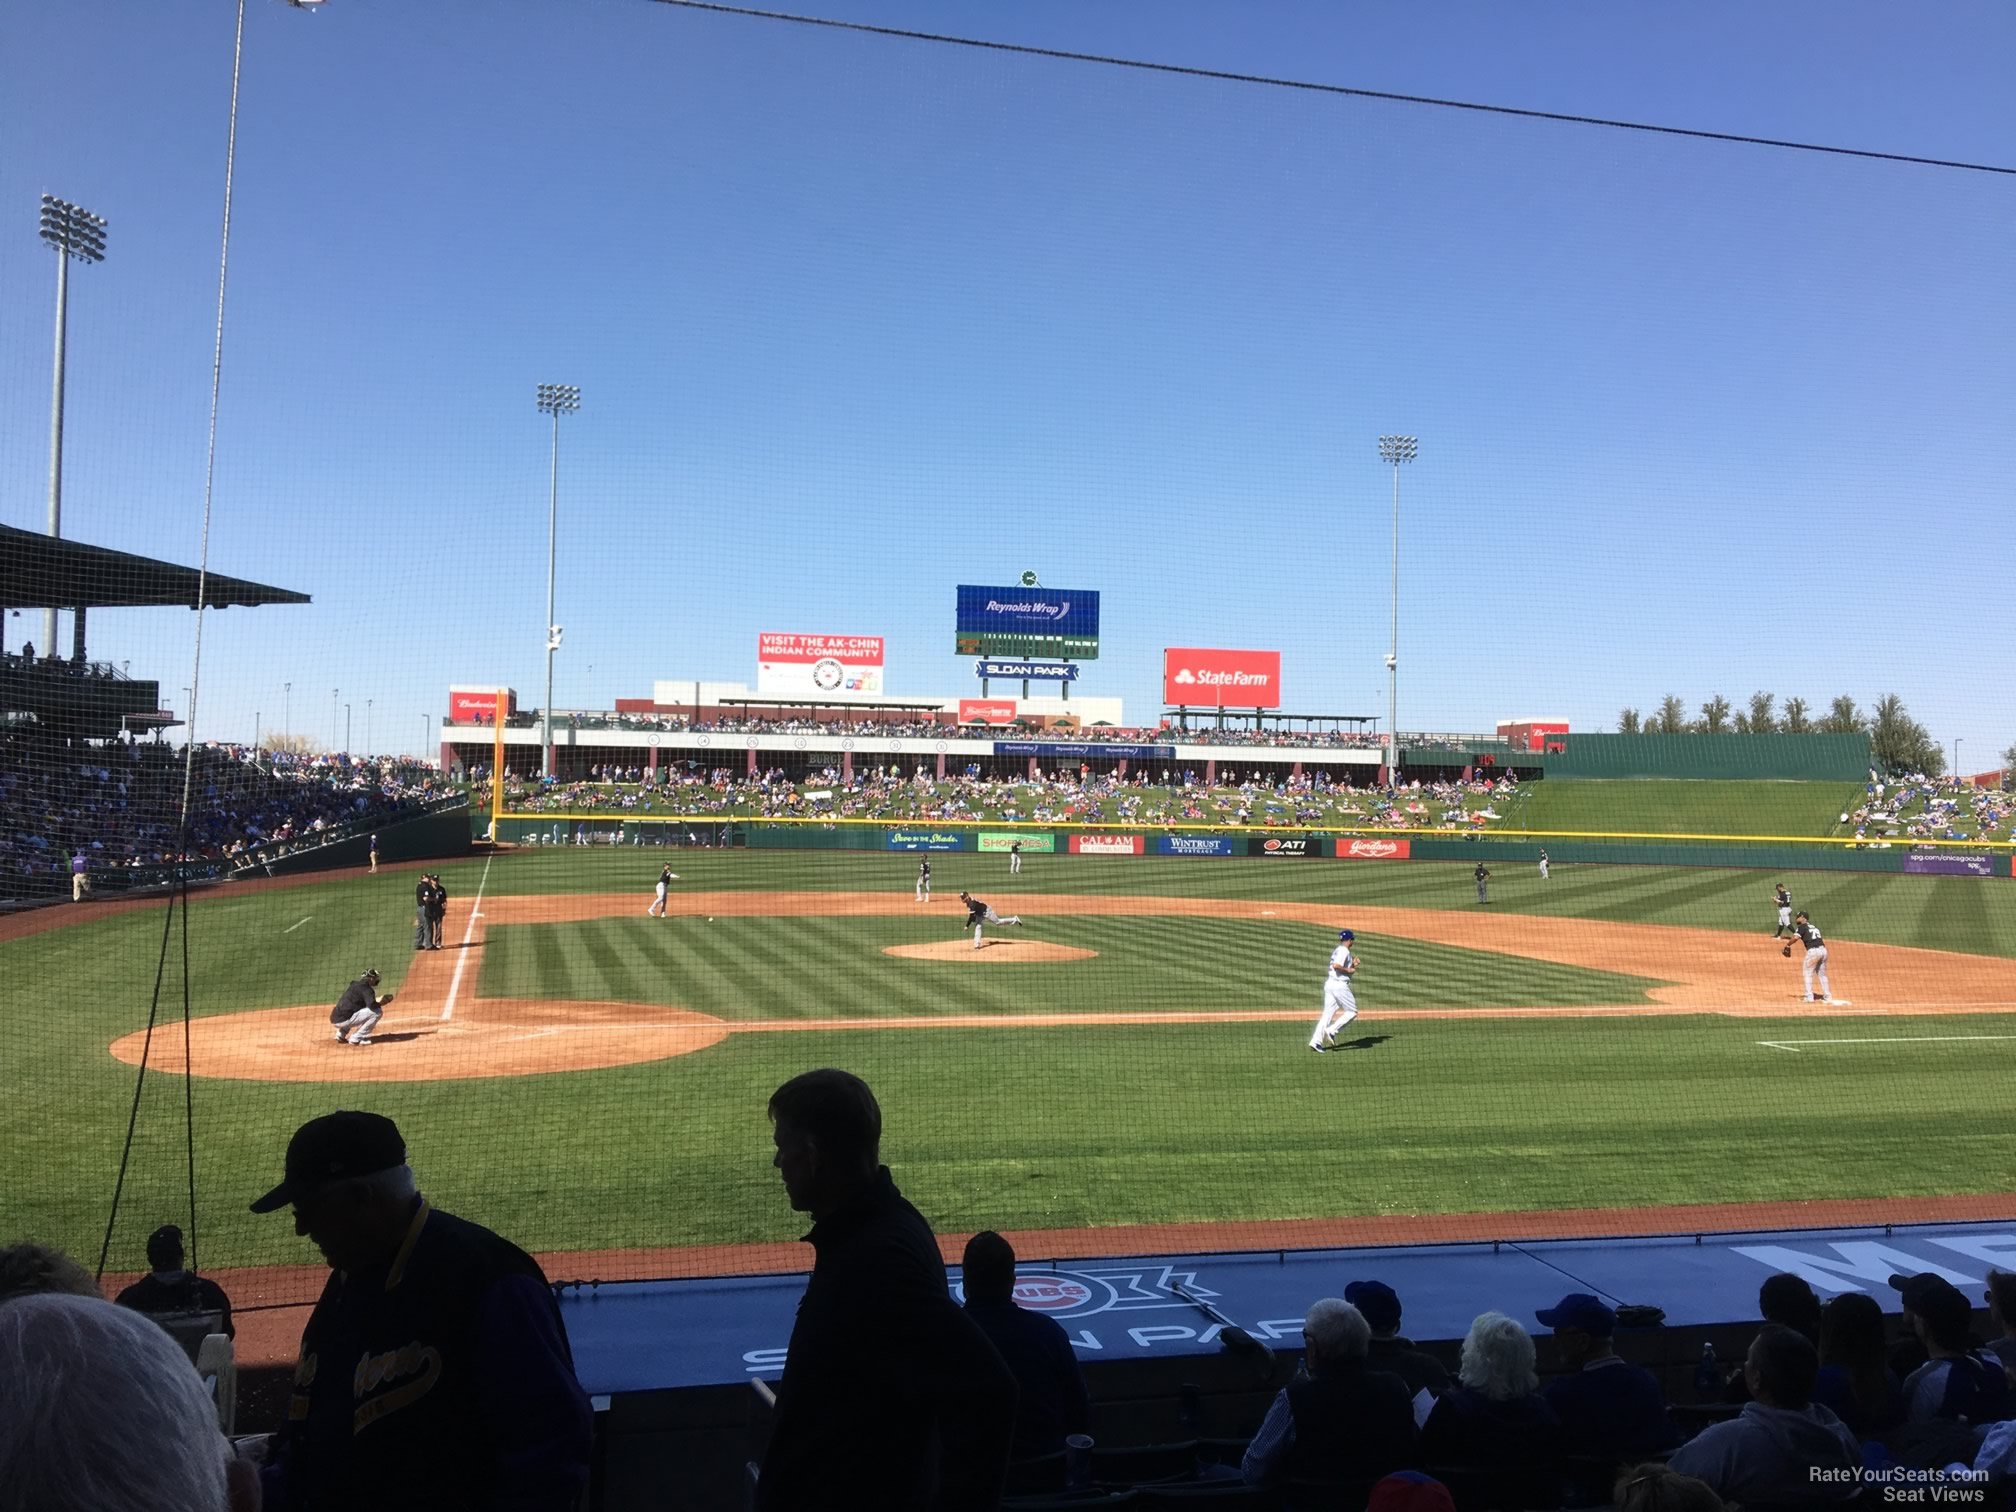 section 113, row 12 seat view  - sloan park